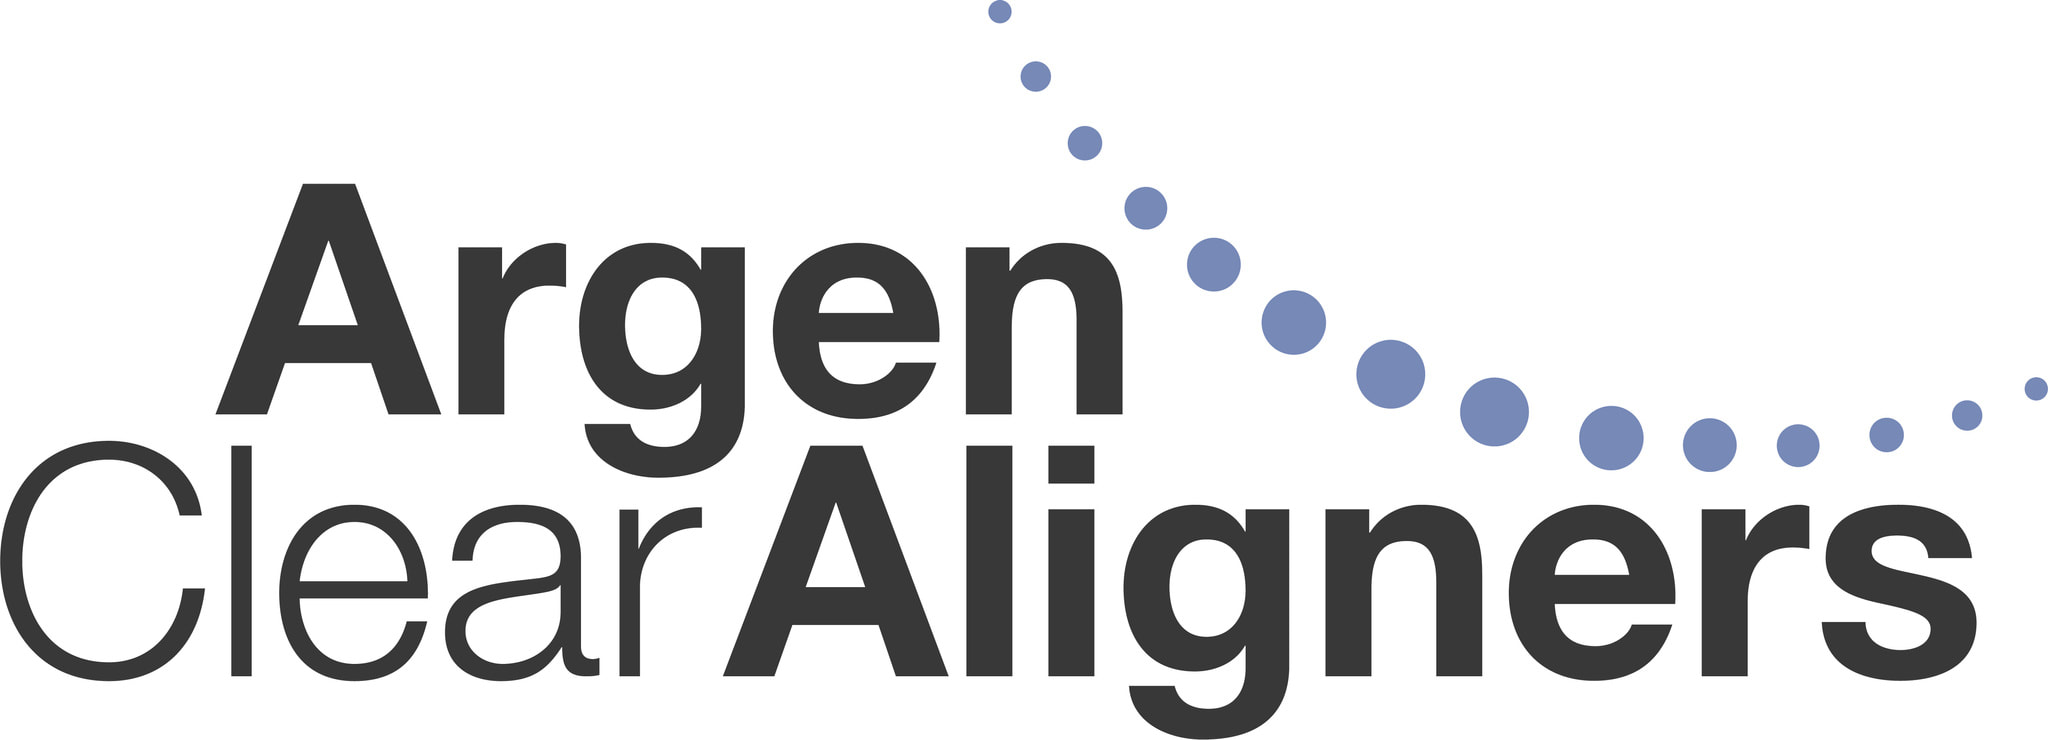 Picture of Argen Clear Aligners logo